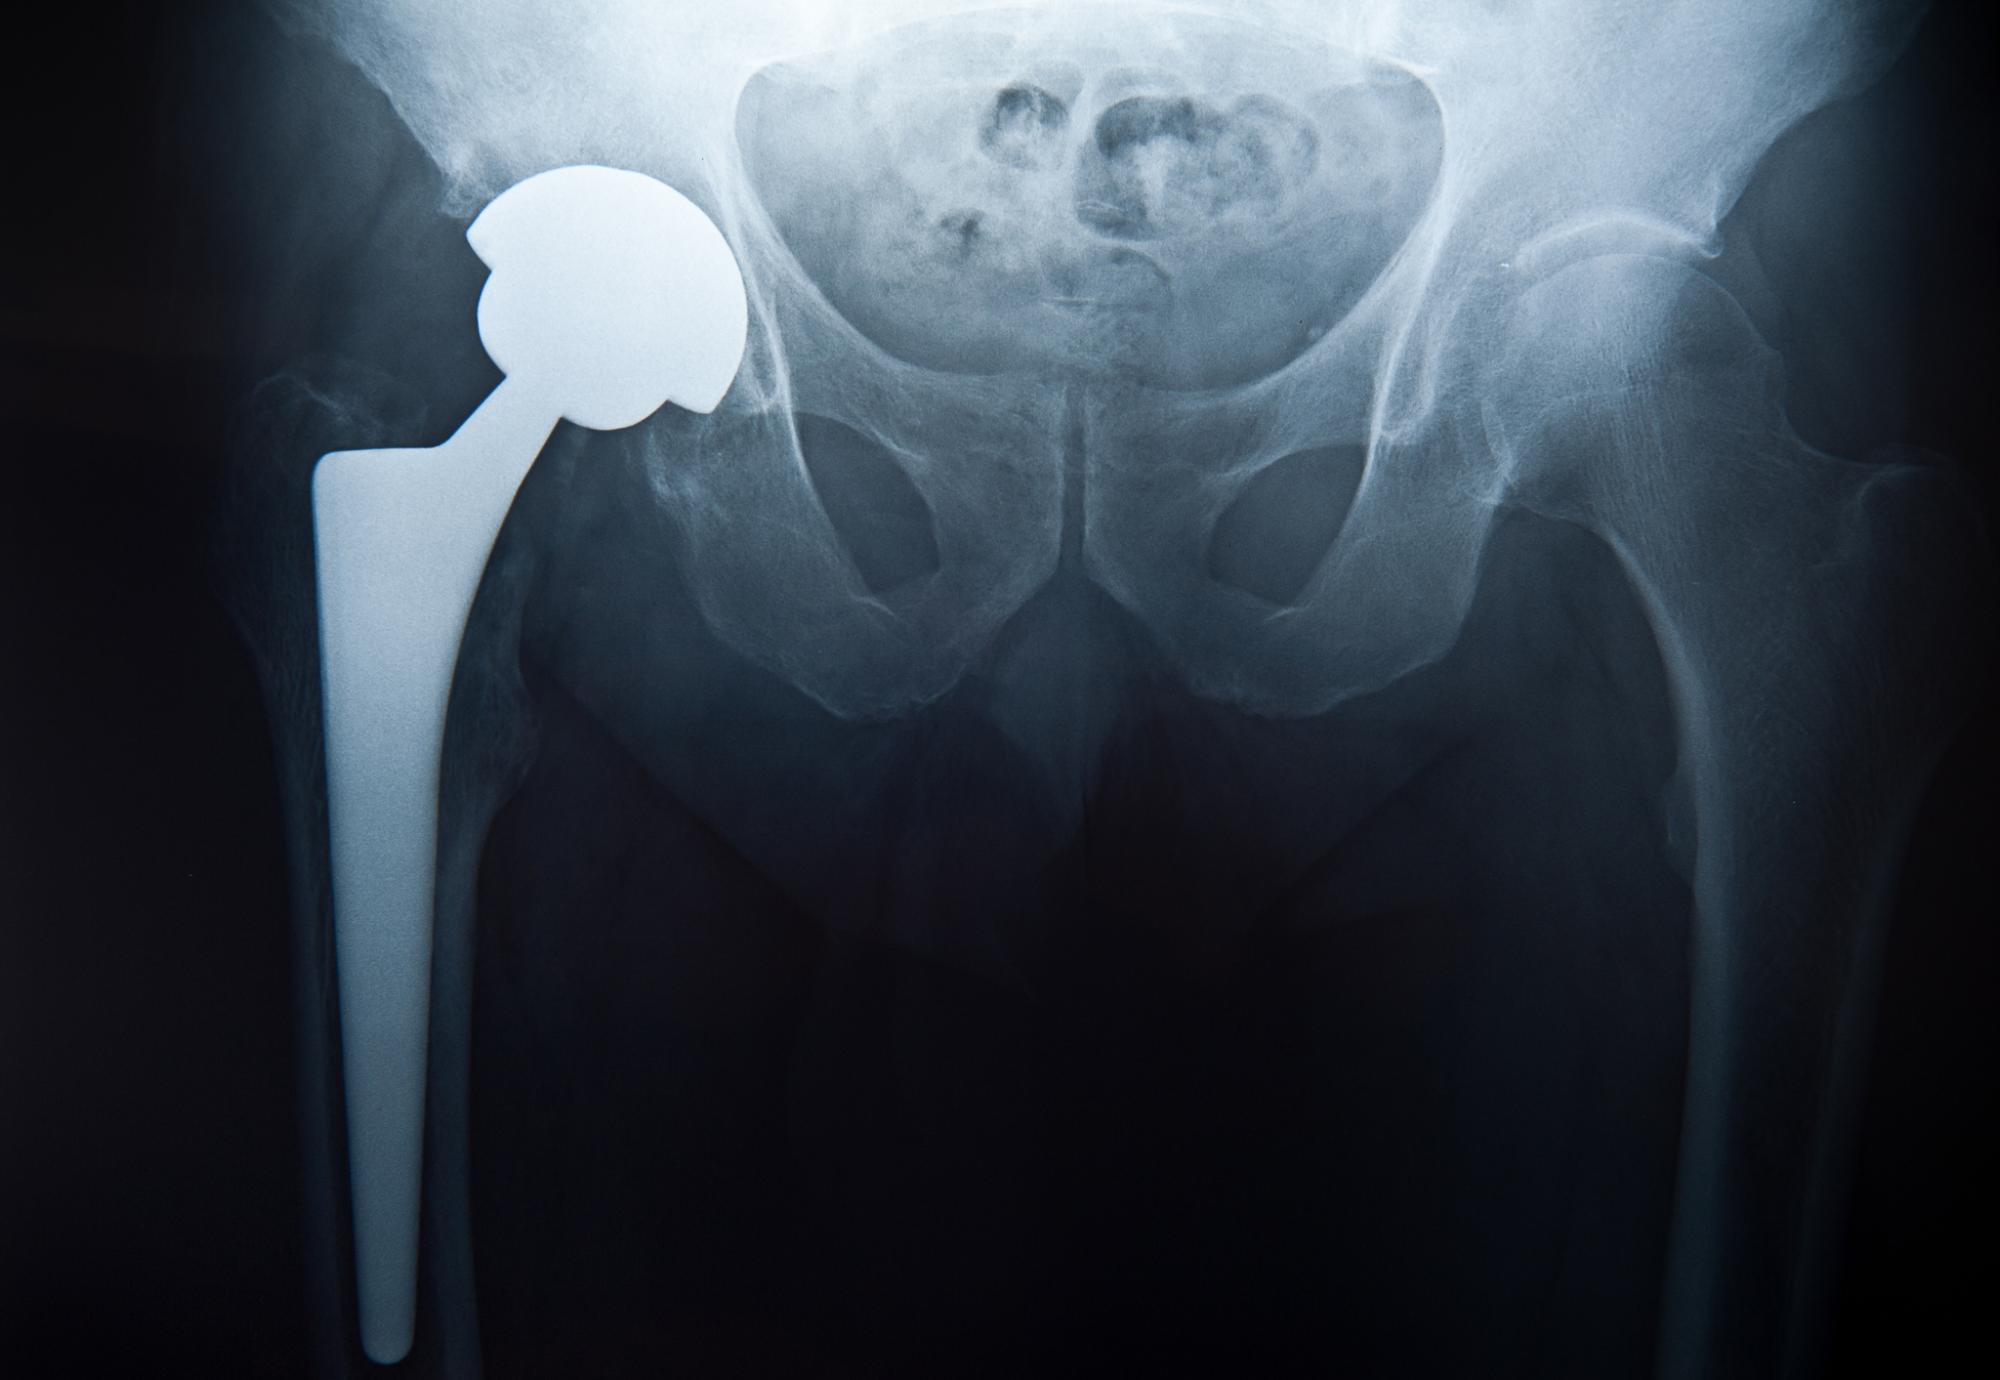 Hip replacement x-ray